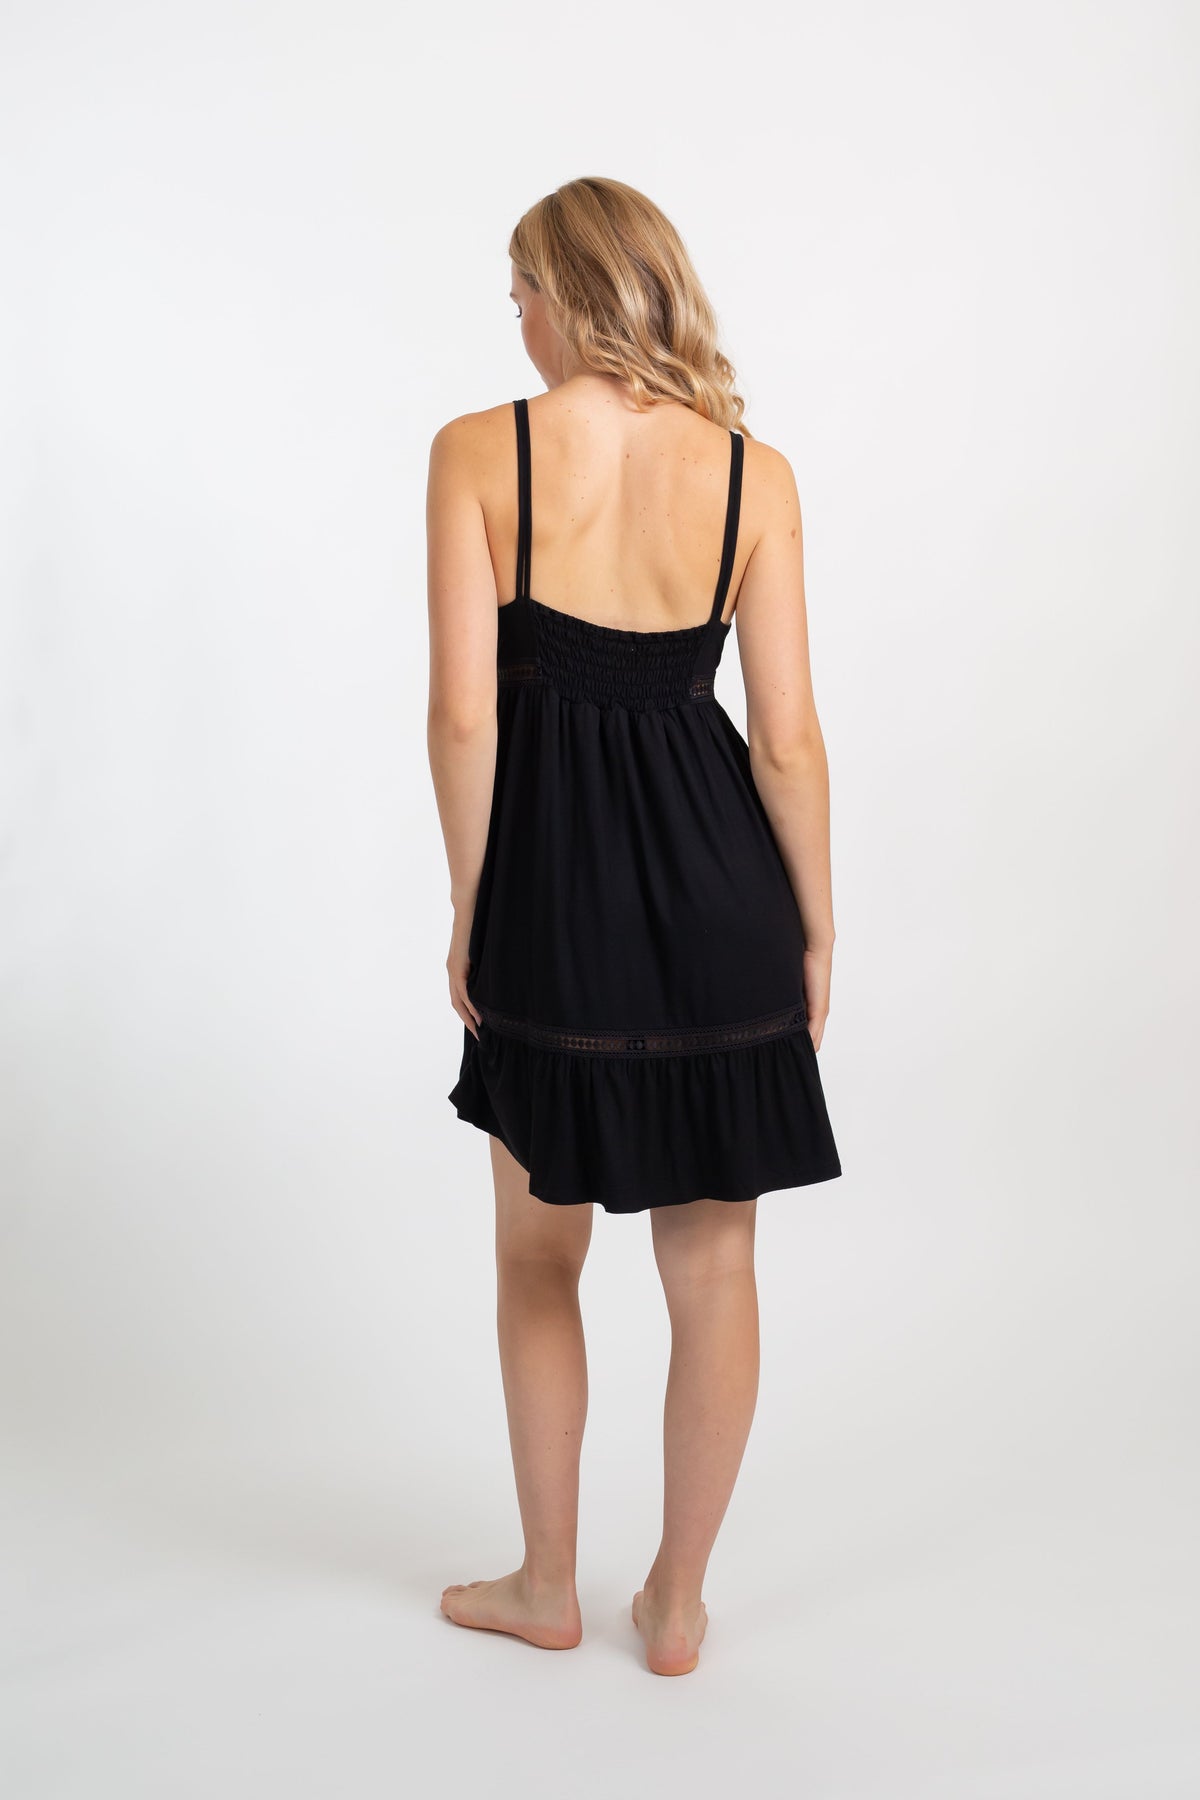 the back of a blonde hair model wearing a black adjustiable strappy black mini dress from Koy Resort